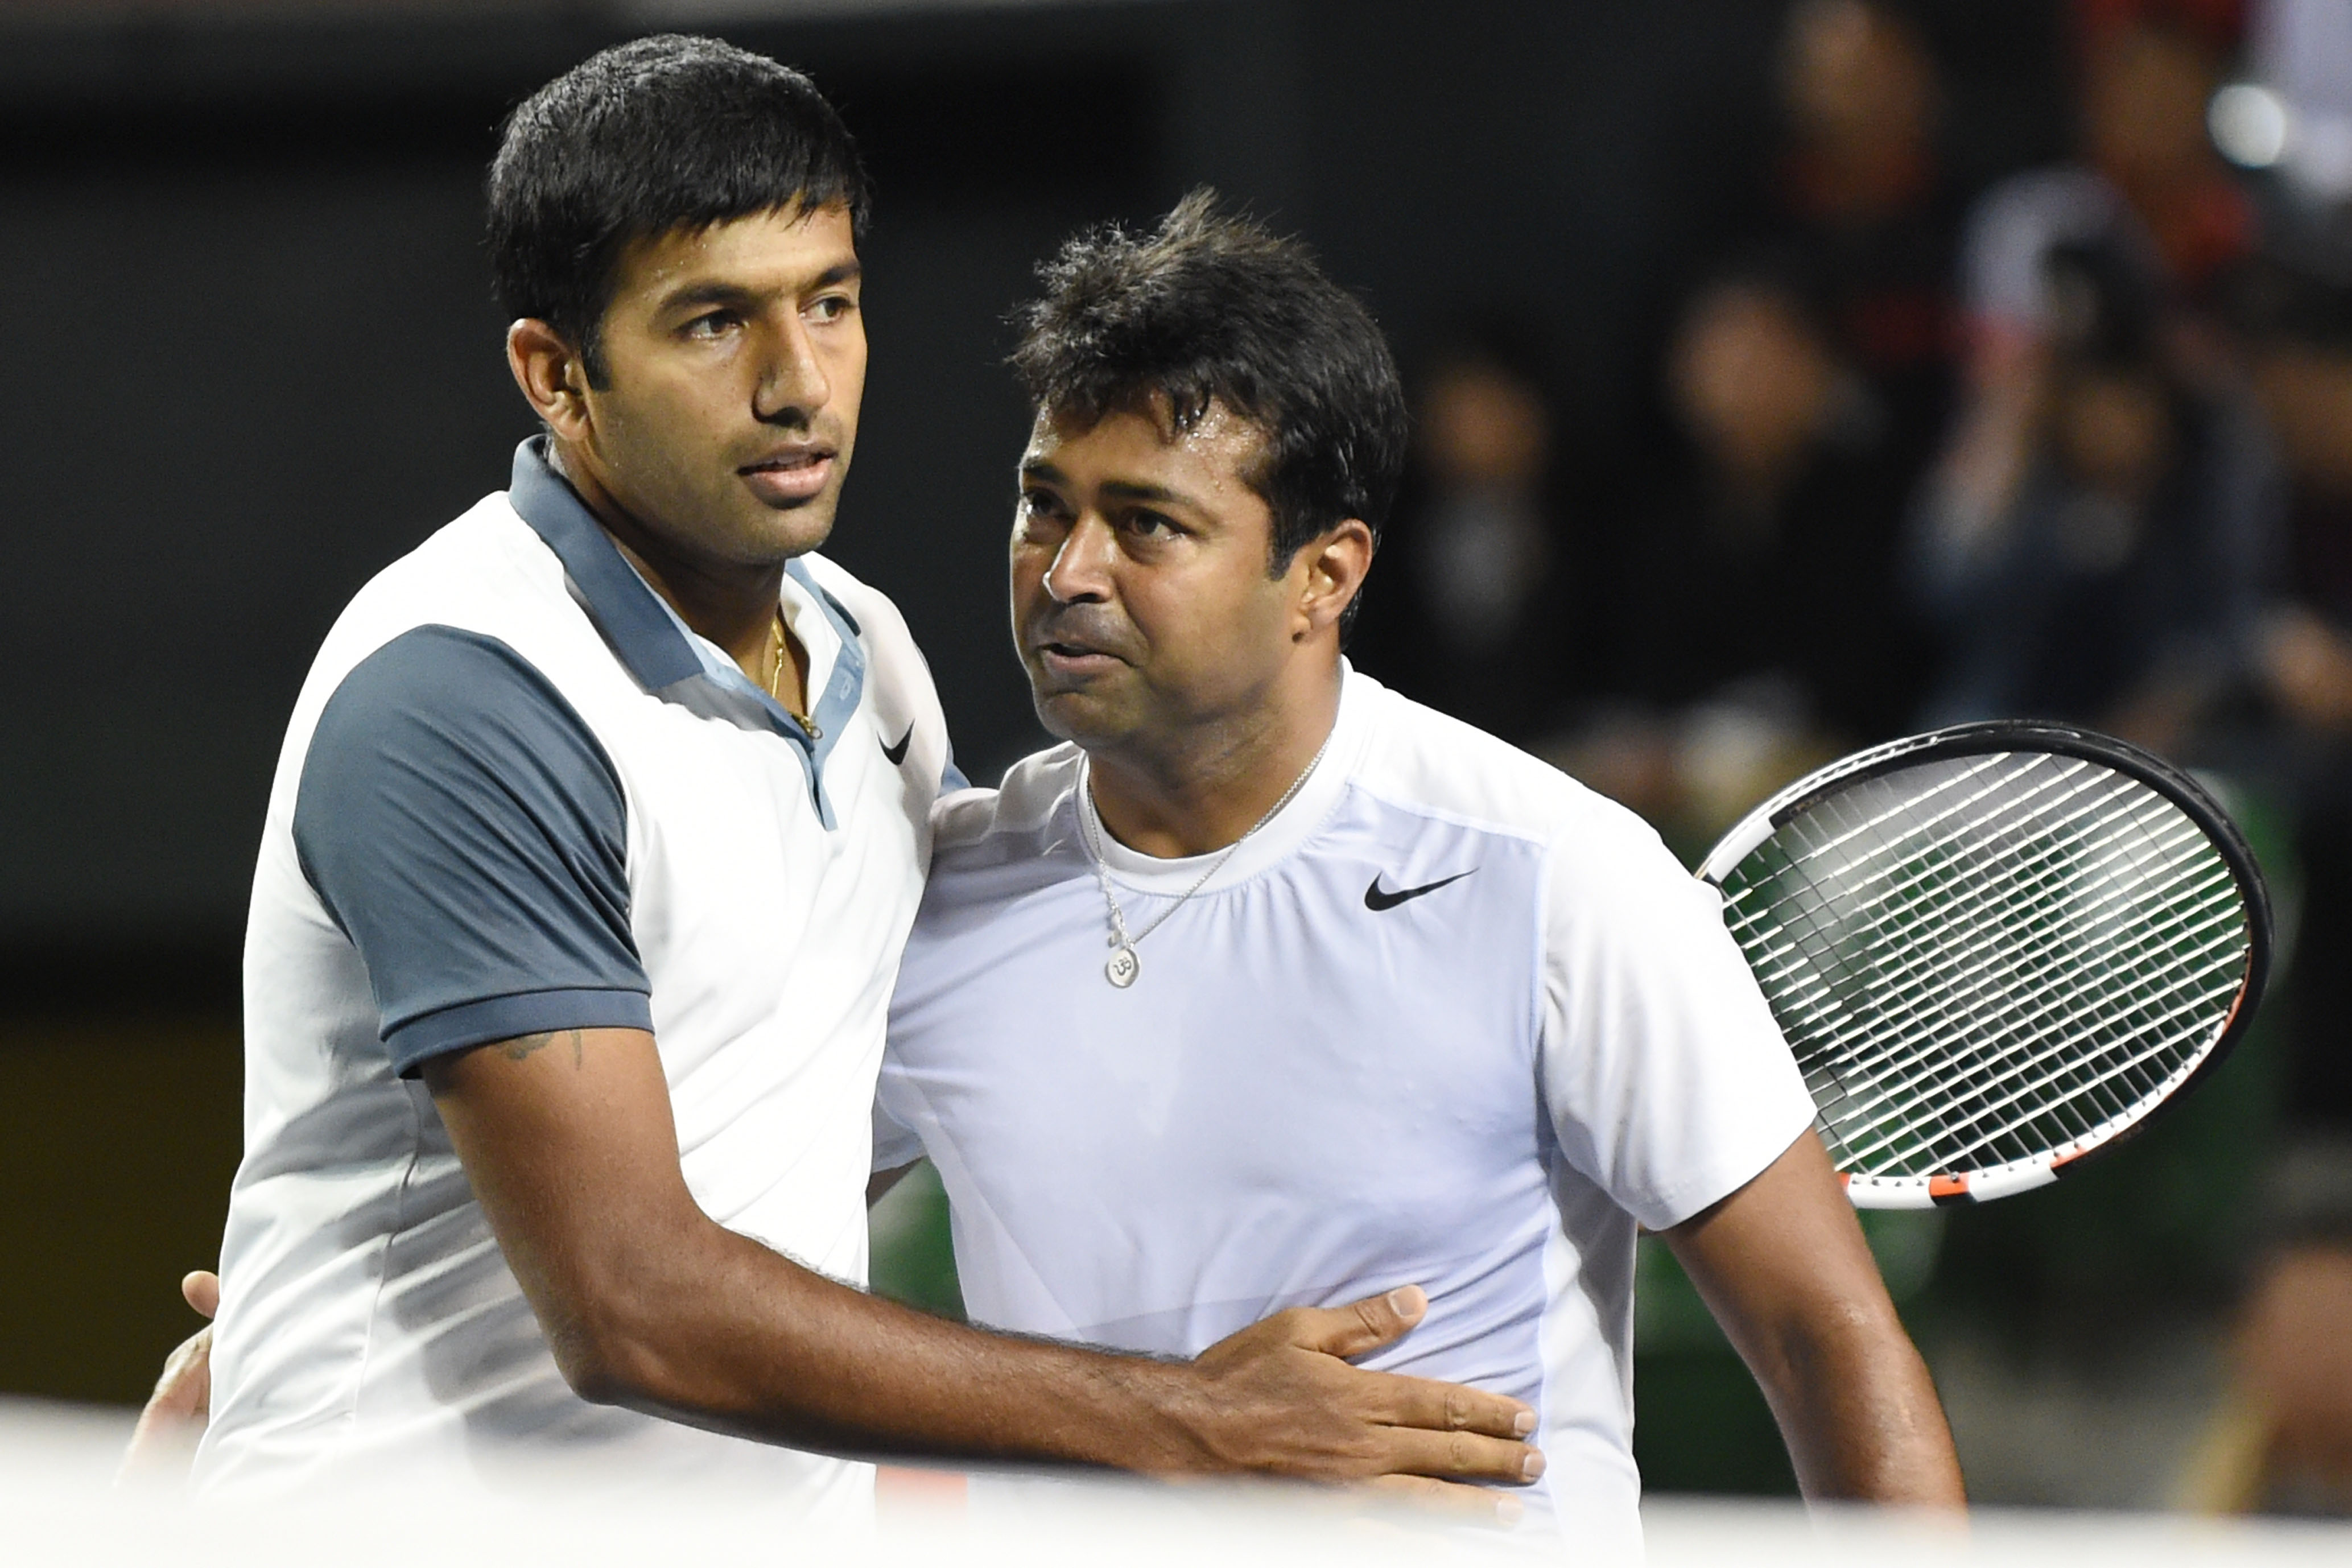 Australian Open | Indian men’s doubles challenge ends in first round